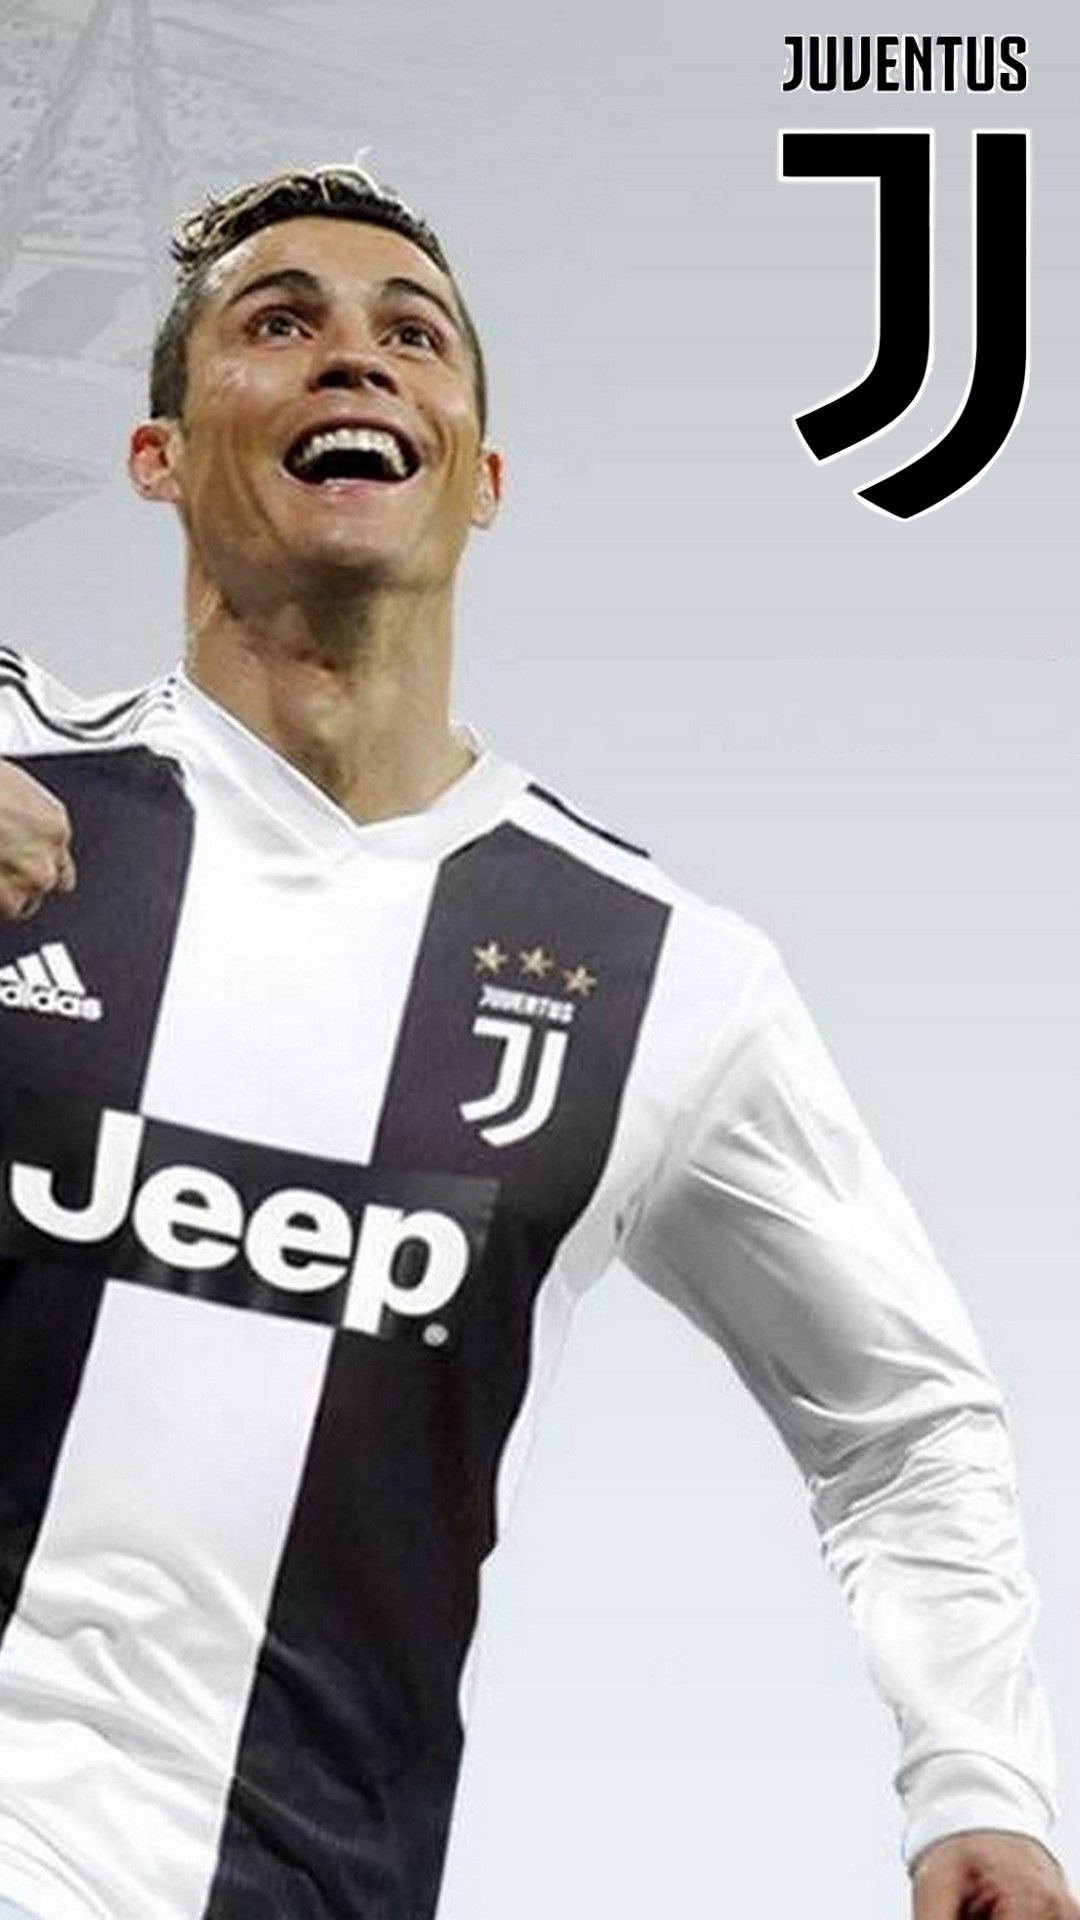 CR7 Juventus HD Wallpaper For iPhone with resolution 1080x1920 pixel. You can make this wallpaper for your Mac or Windows Desktop Background, iPhone, Android or Tablet and another Smartphone device